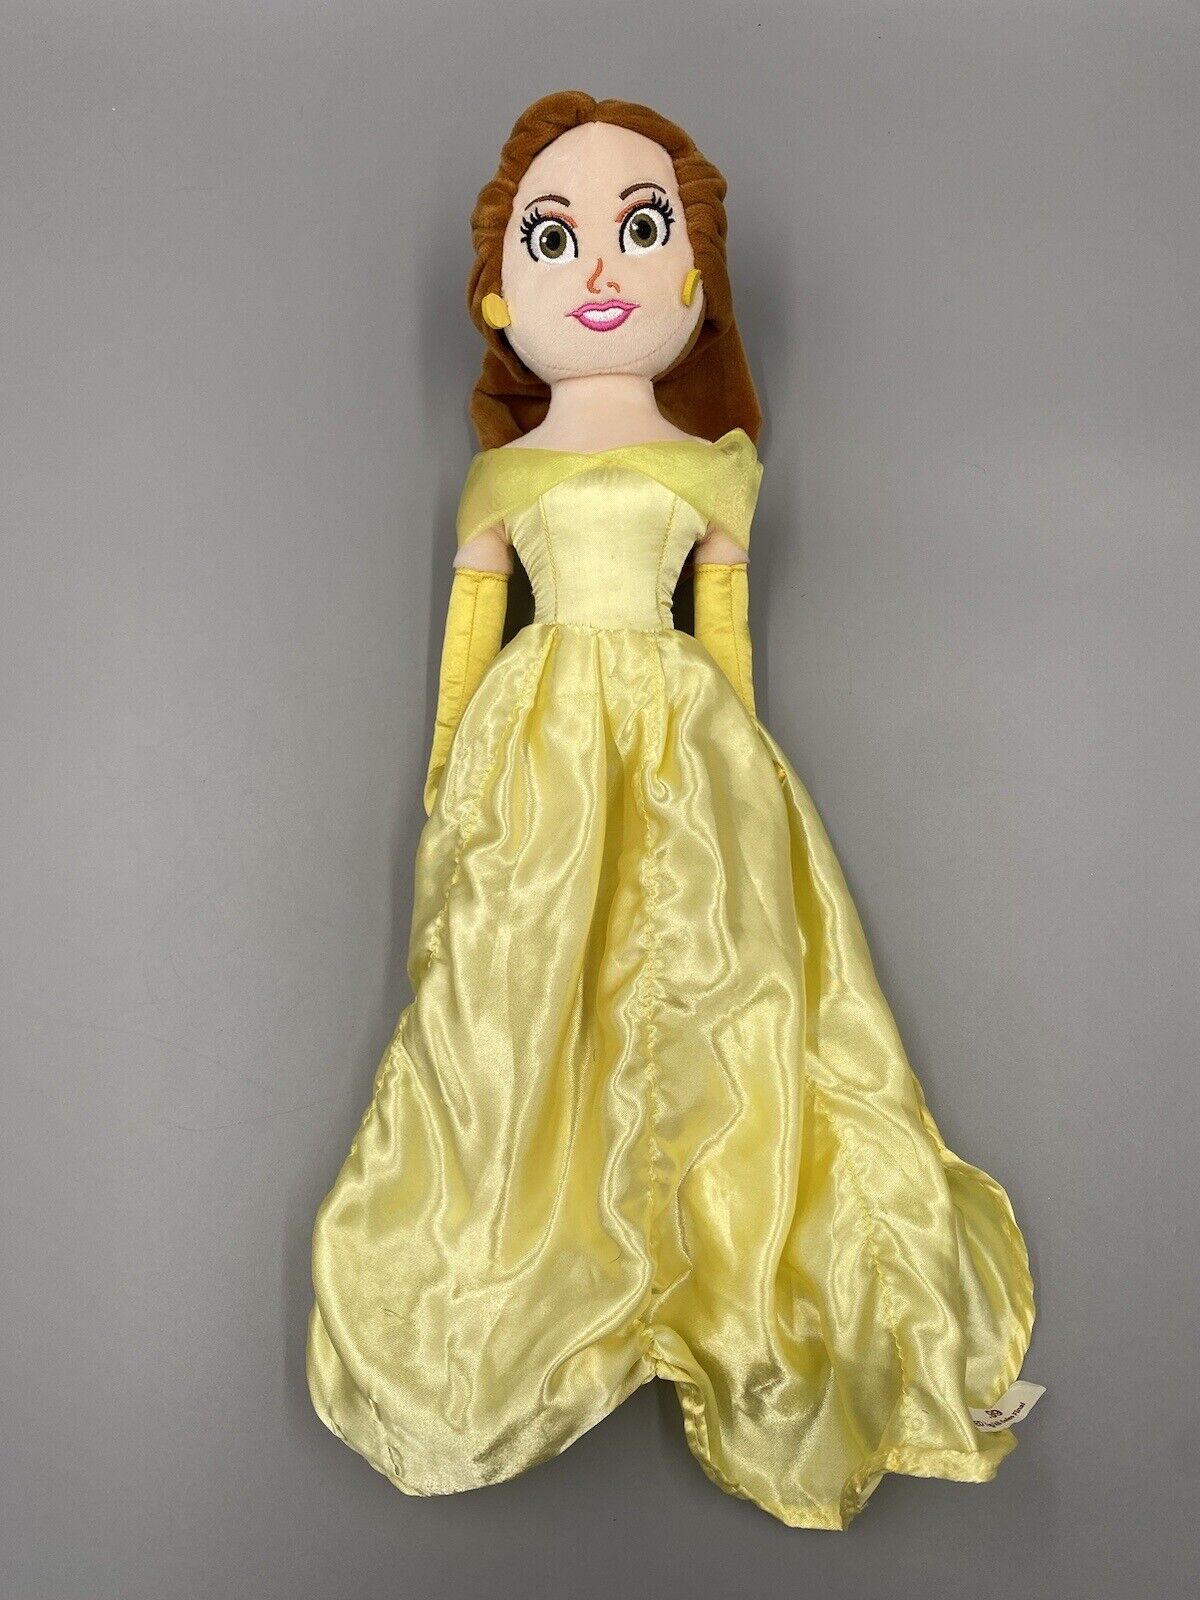 Disney Princess Belle Plush Doll Beauty And The Beast 21” Stuffed Character